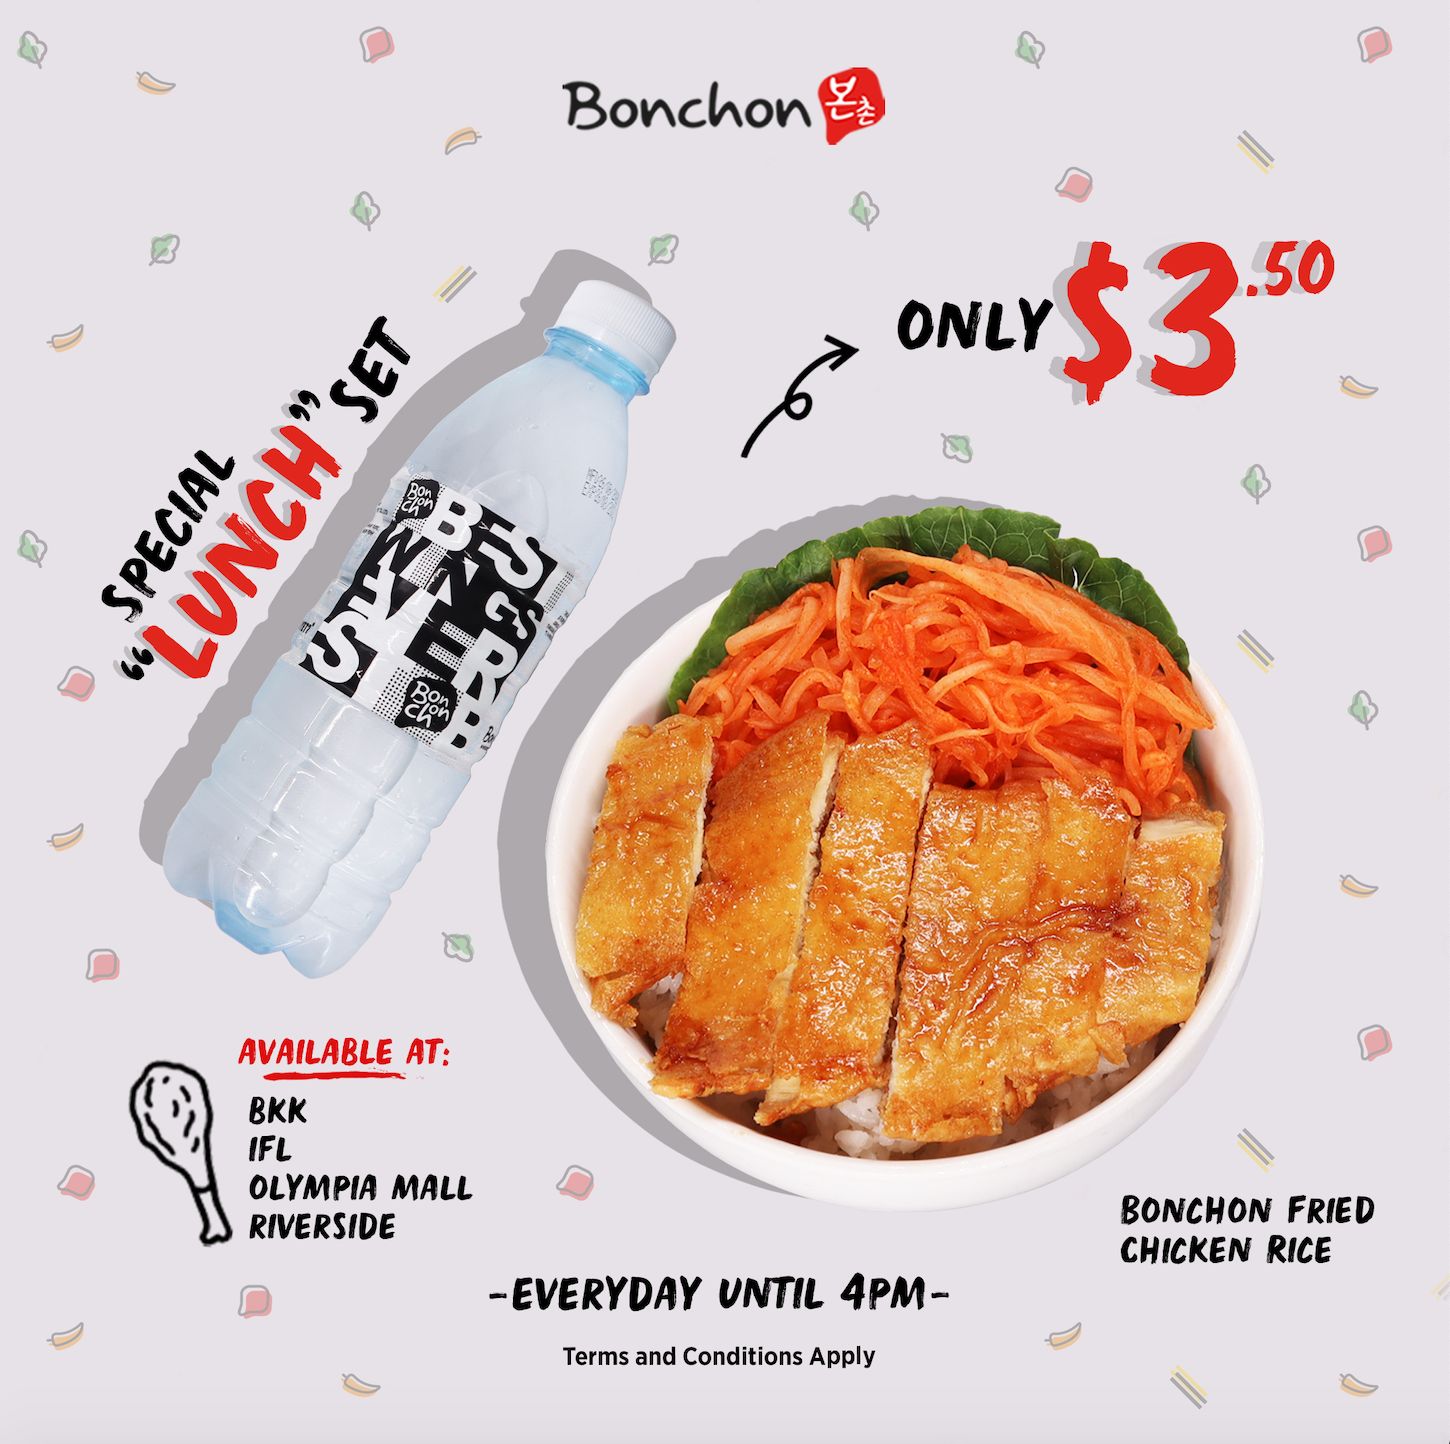 Special Lunch Set Only $3.50